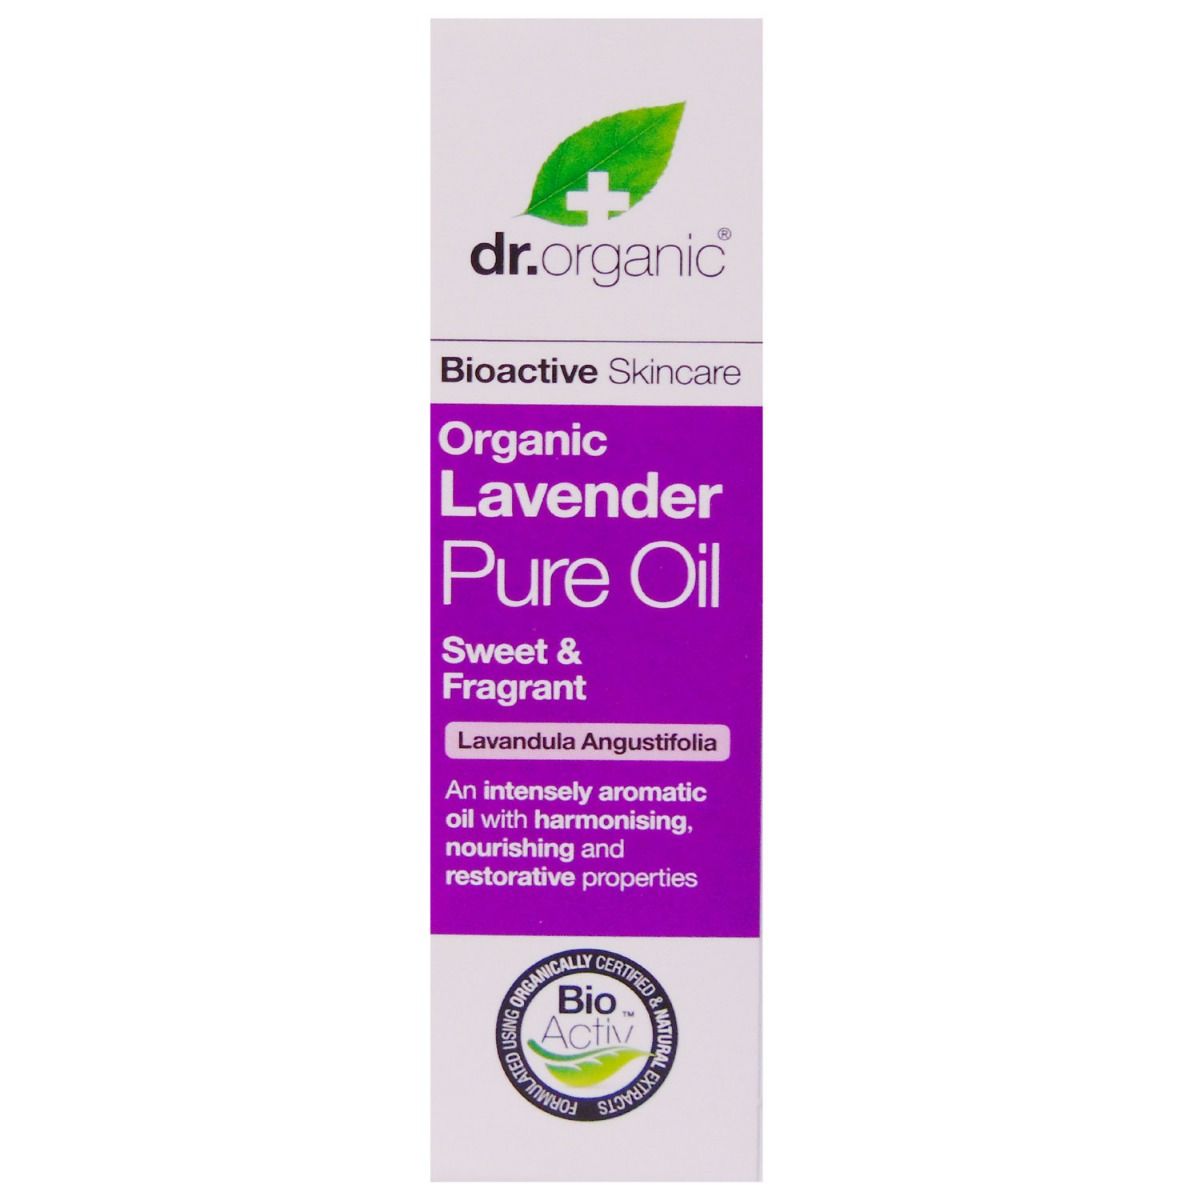 dr.organic Lavender Pure Oil, 10 ml, Pack of 1 